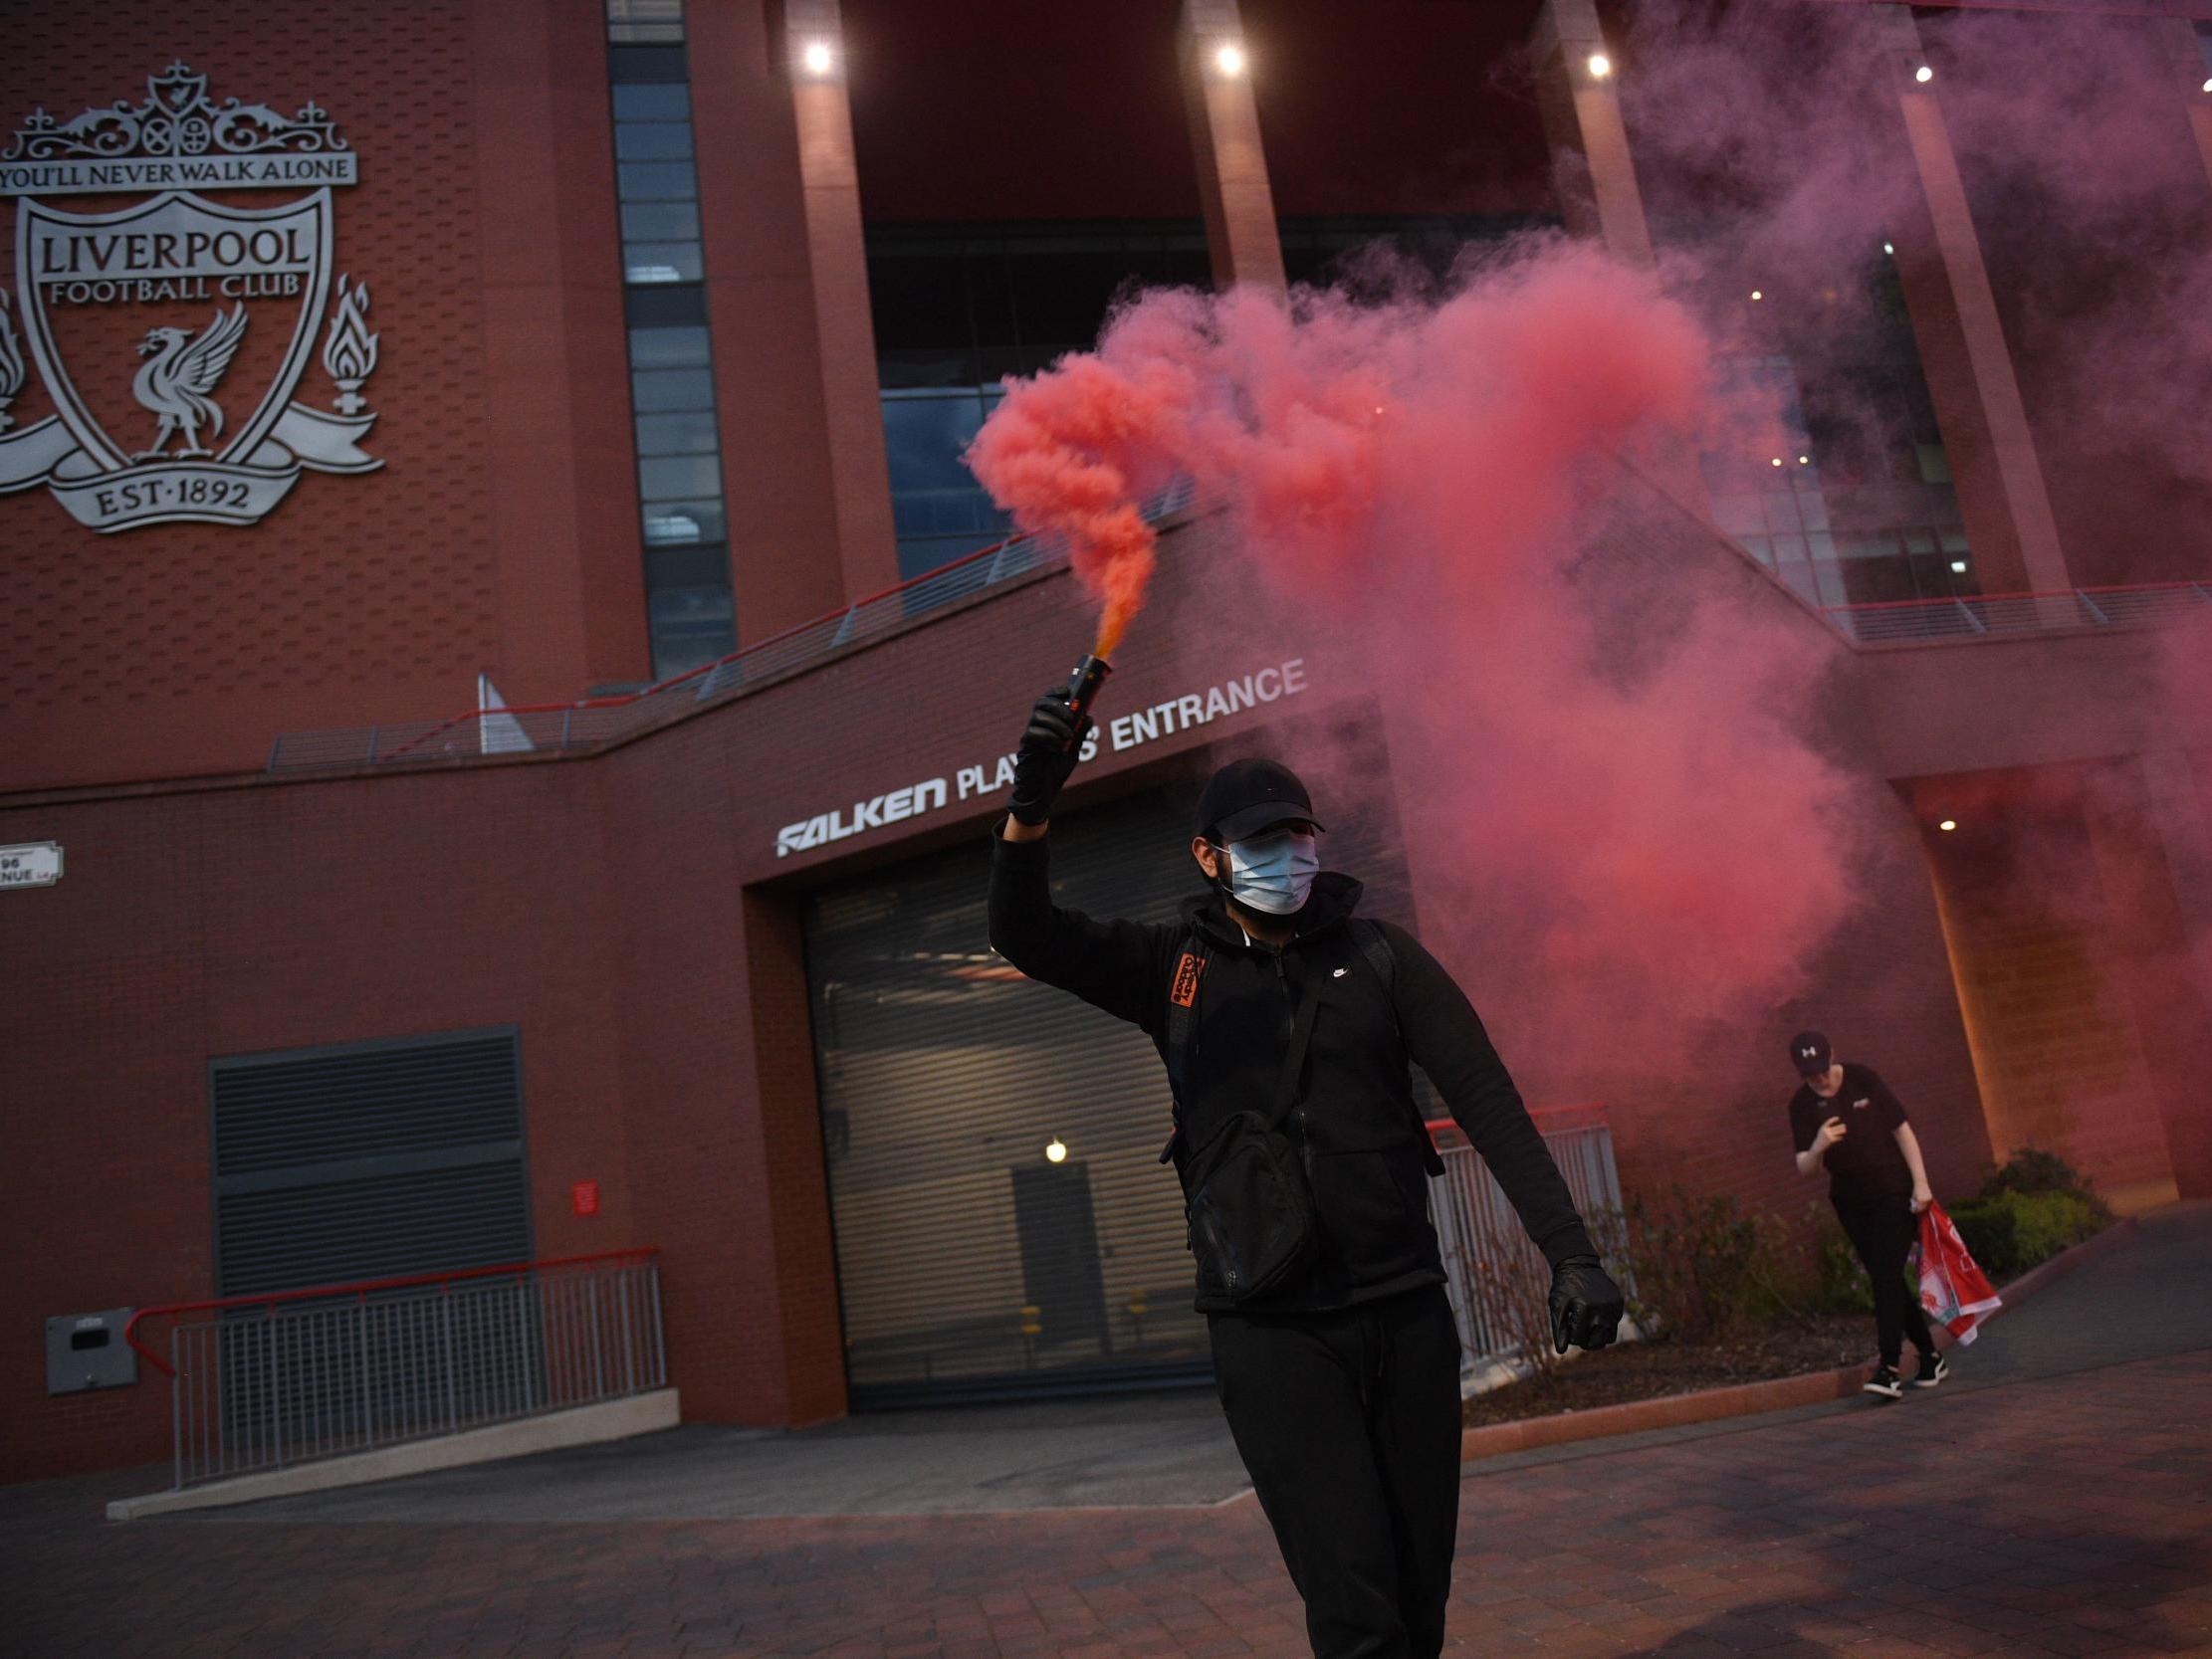 A fan carries a flare as they celebrate Liverpool winning the title